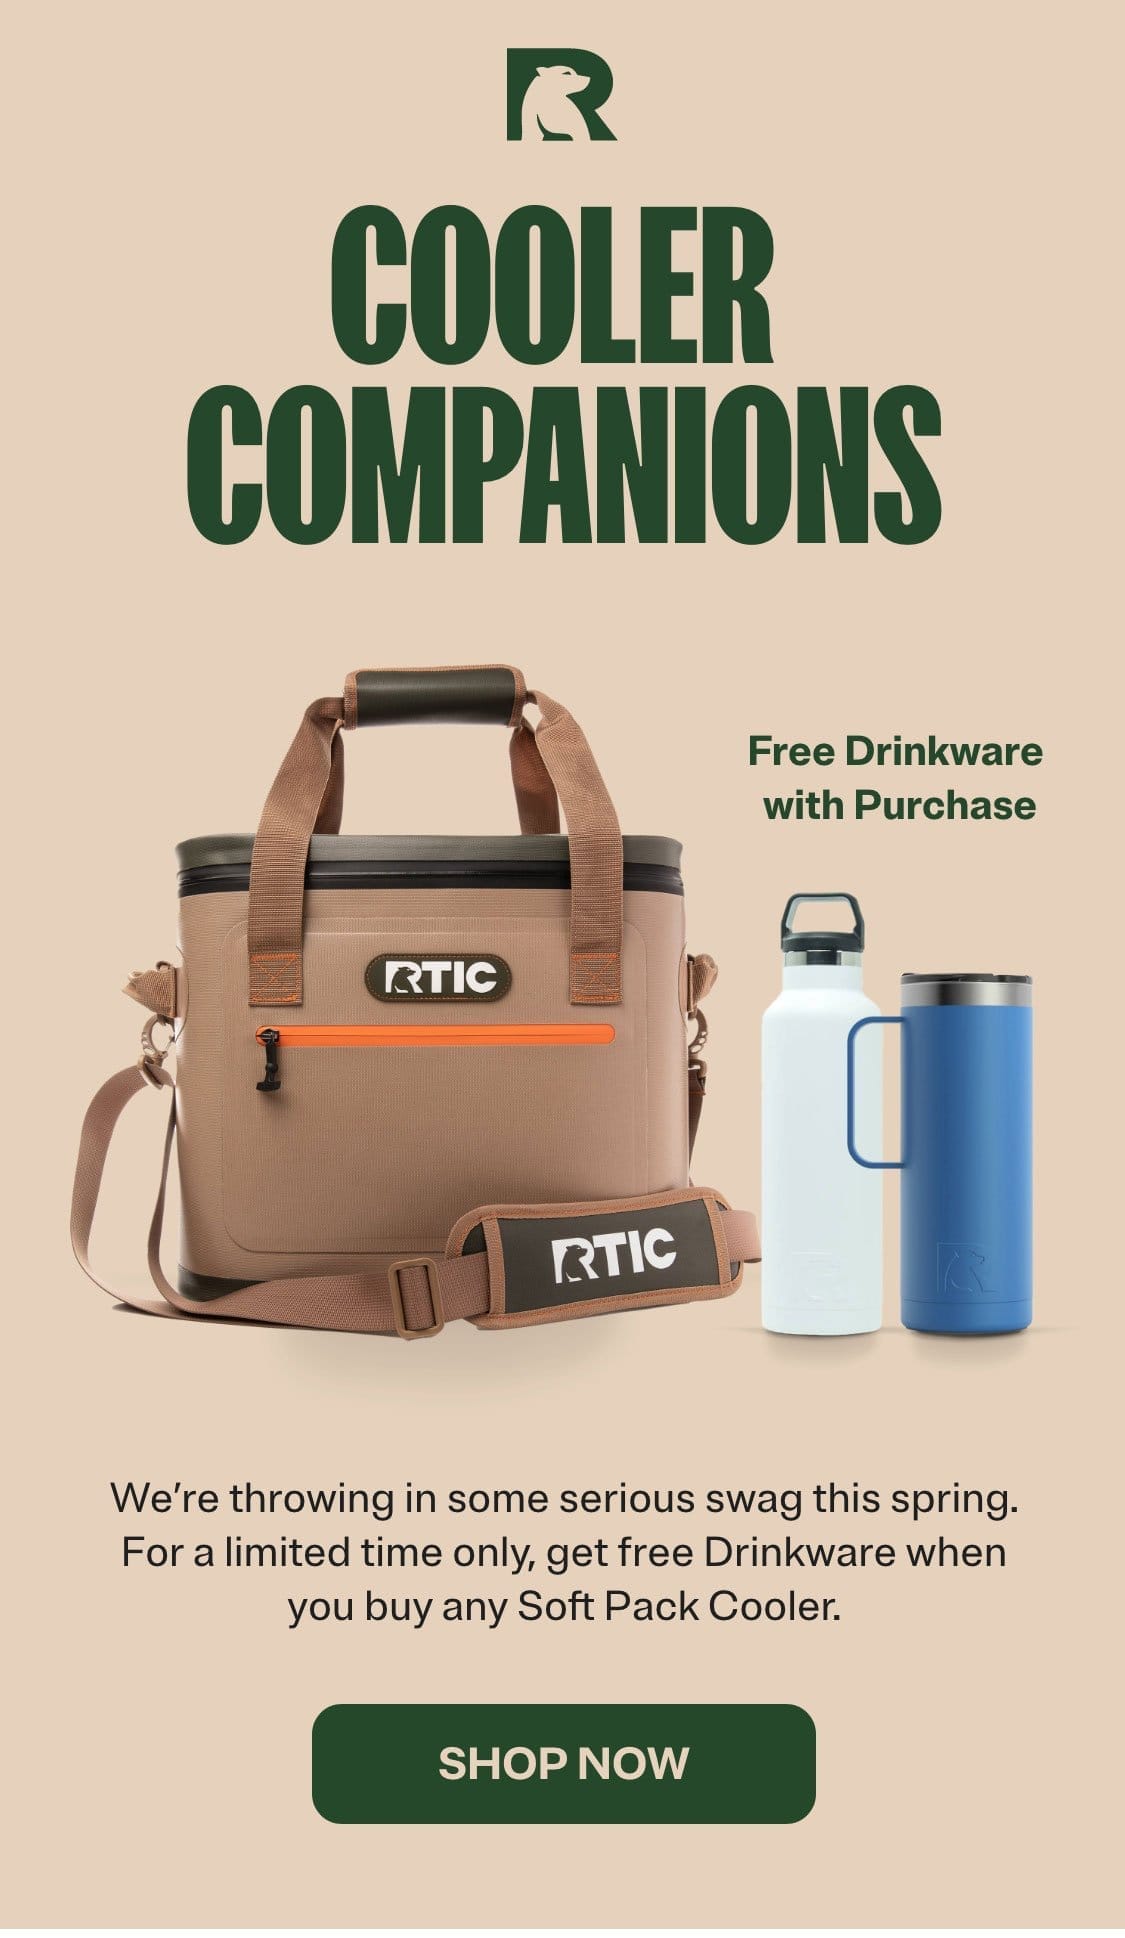 Cooler Companions - Free Drinkware with Purchase